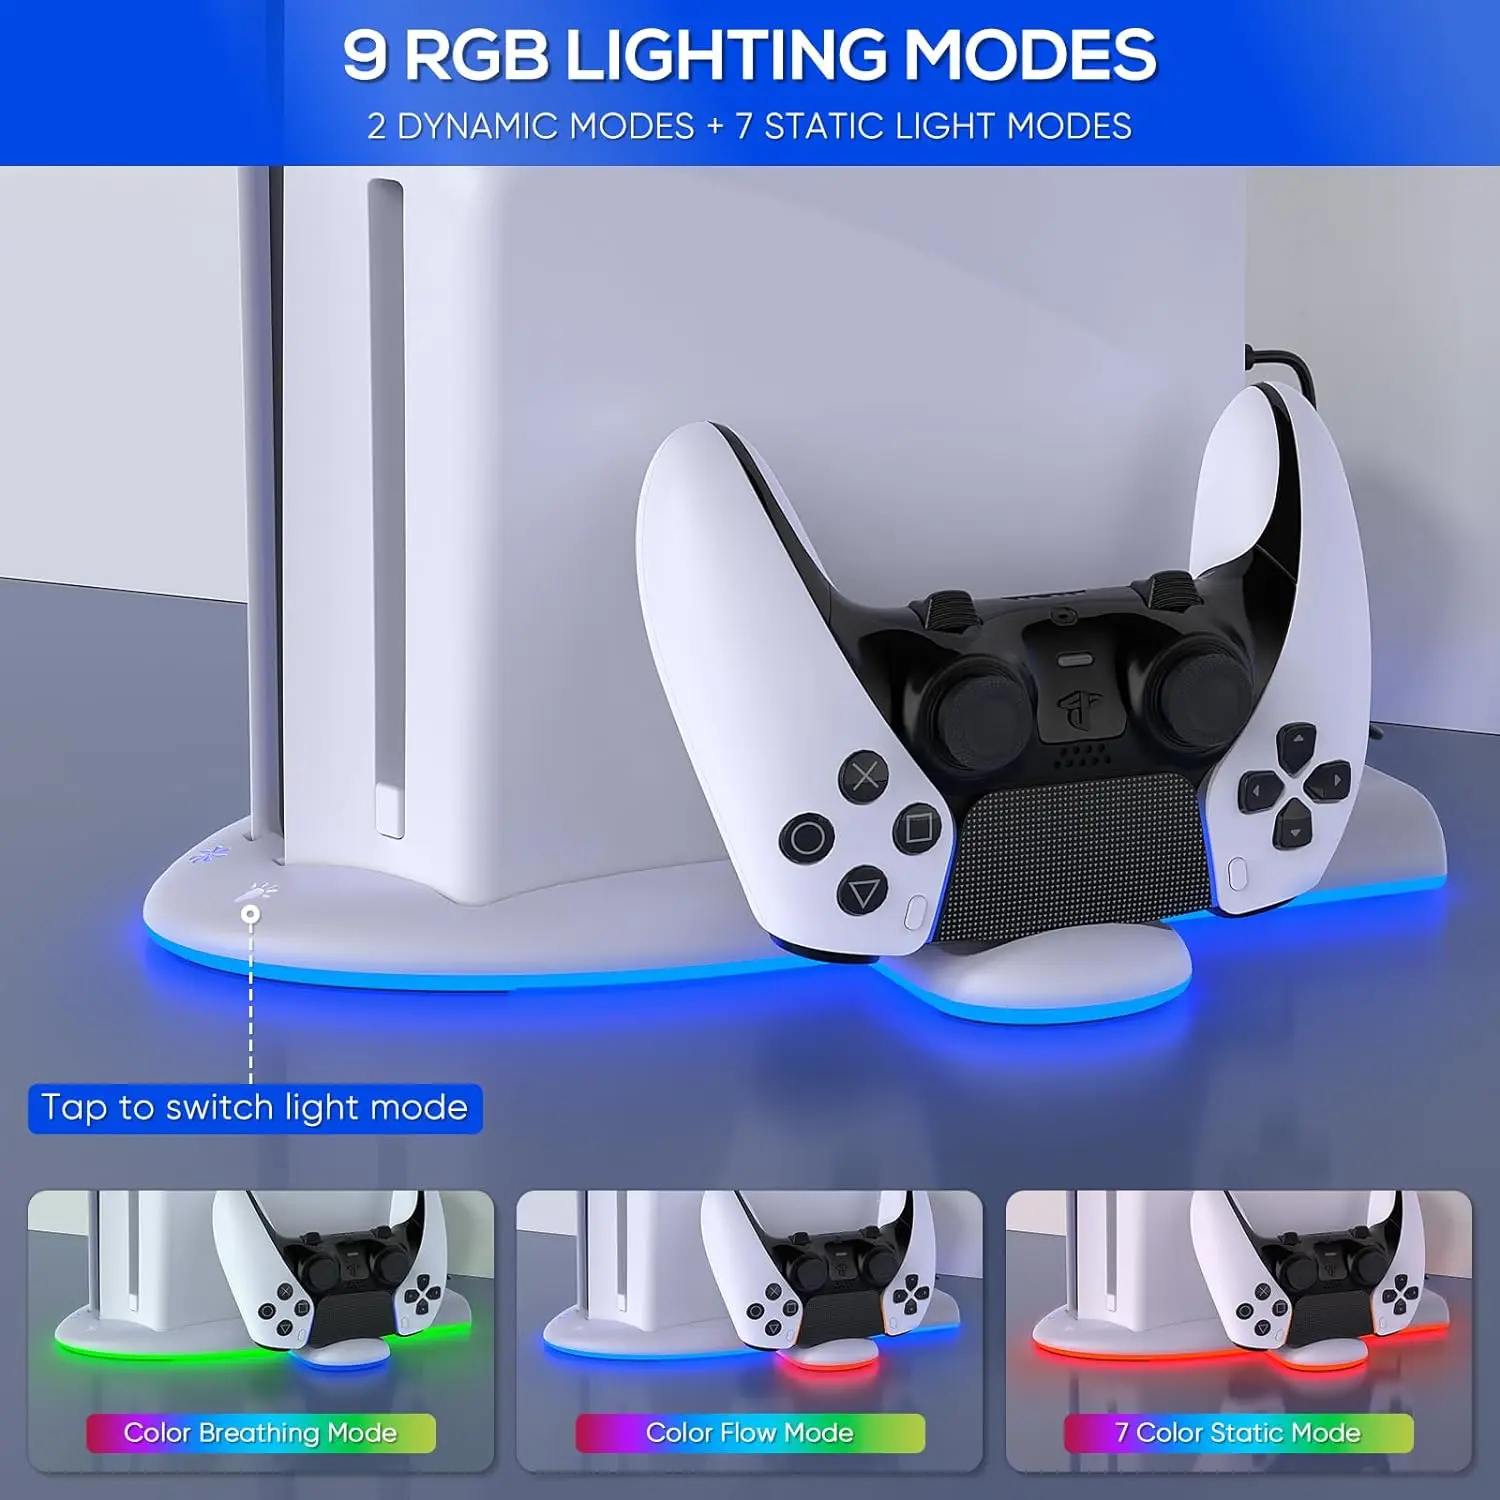 For PS5 Slim Console Cooling Stand Base For PS5 Slim Gamepad Controller  Charge Seat With RGB Colorful Atmosphere Light Ring